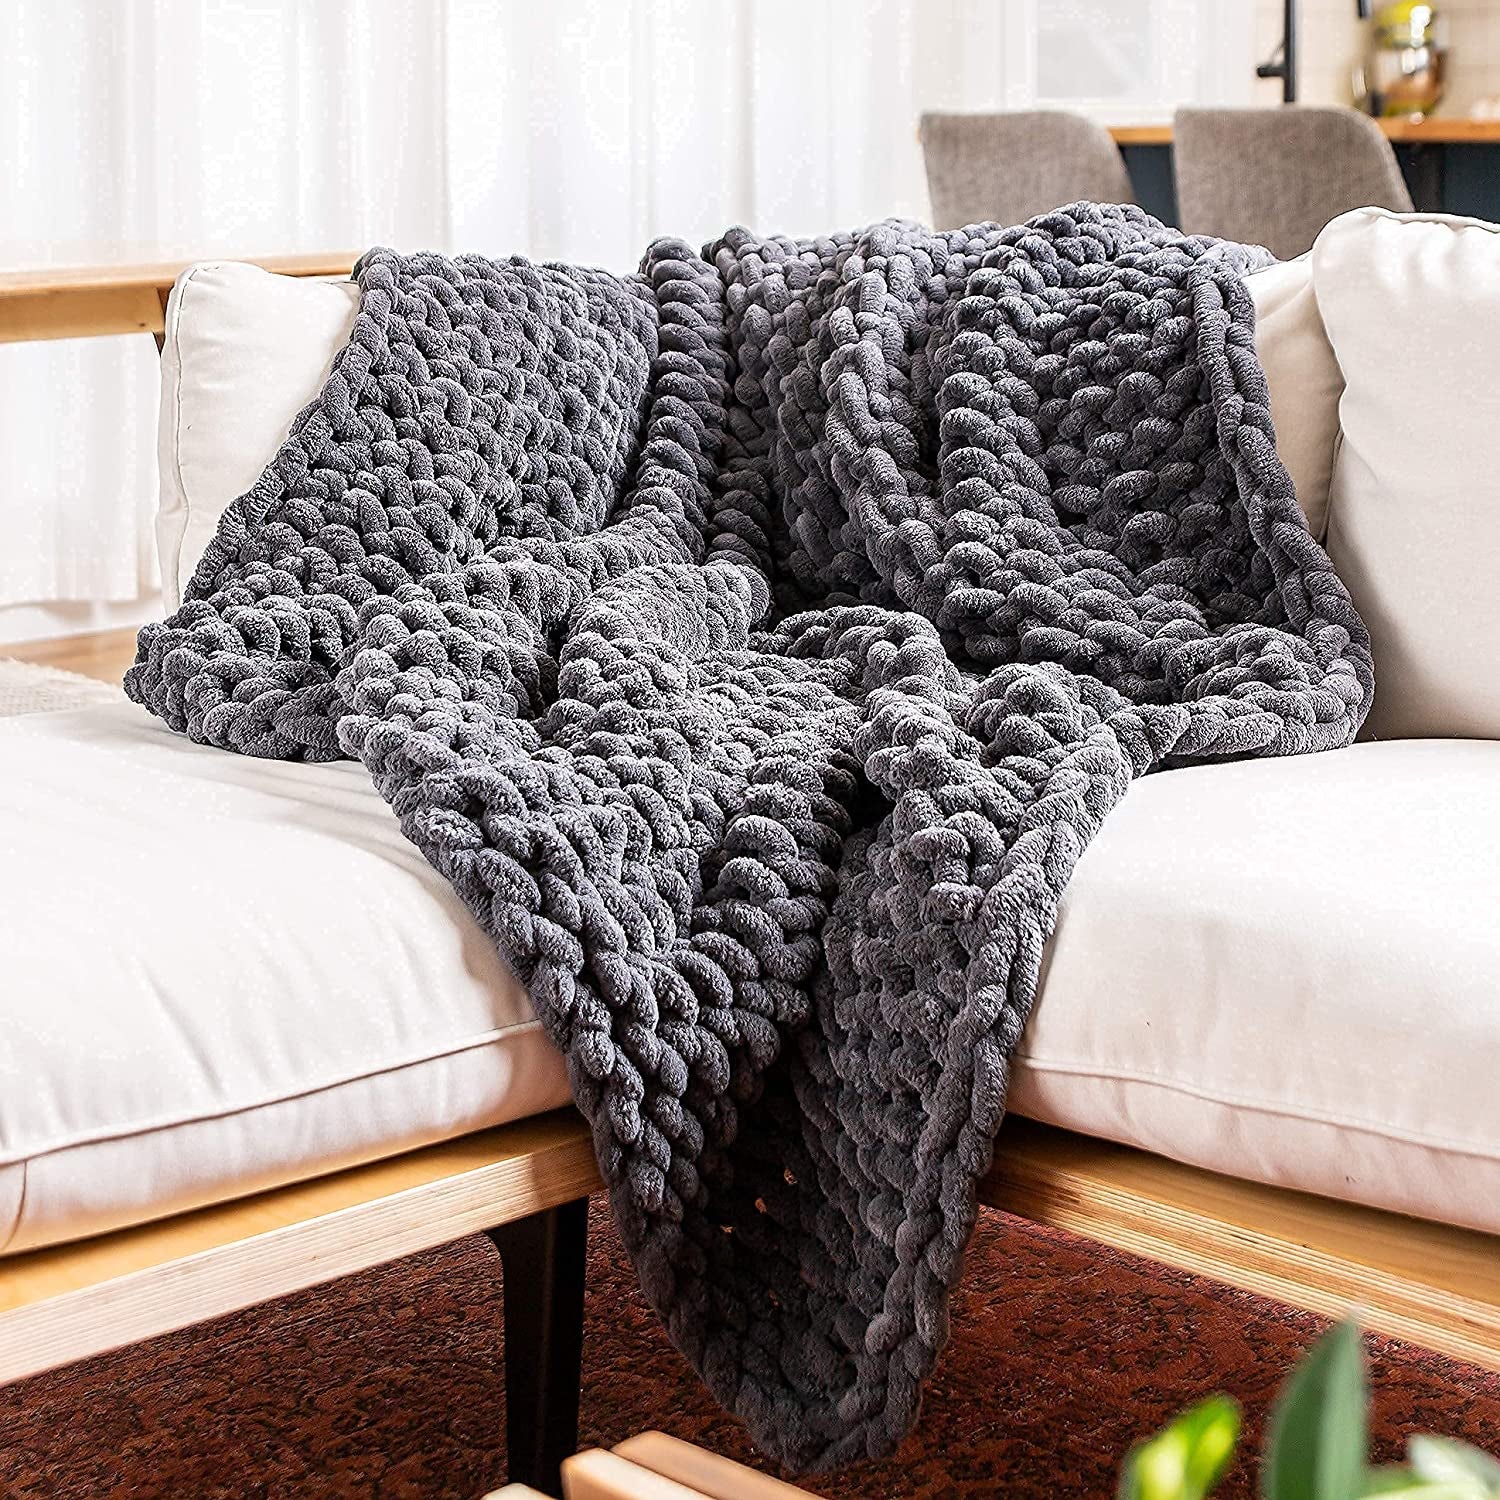 Grey Large Chunky Knit Blanket Throw 50X70; Knitted Throw Blankets for Boho Decor,Large Knit Blanket Chunky Yarn;Thick Knitted Blanket Chunky;Thick Cable Knit Throw for Couch/King Bed